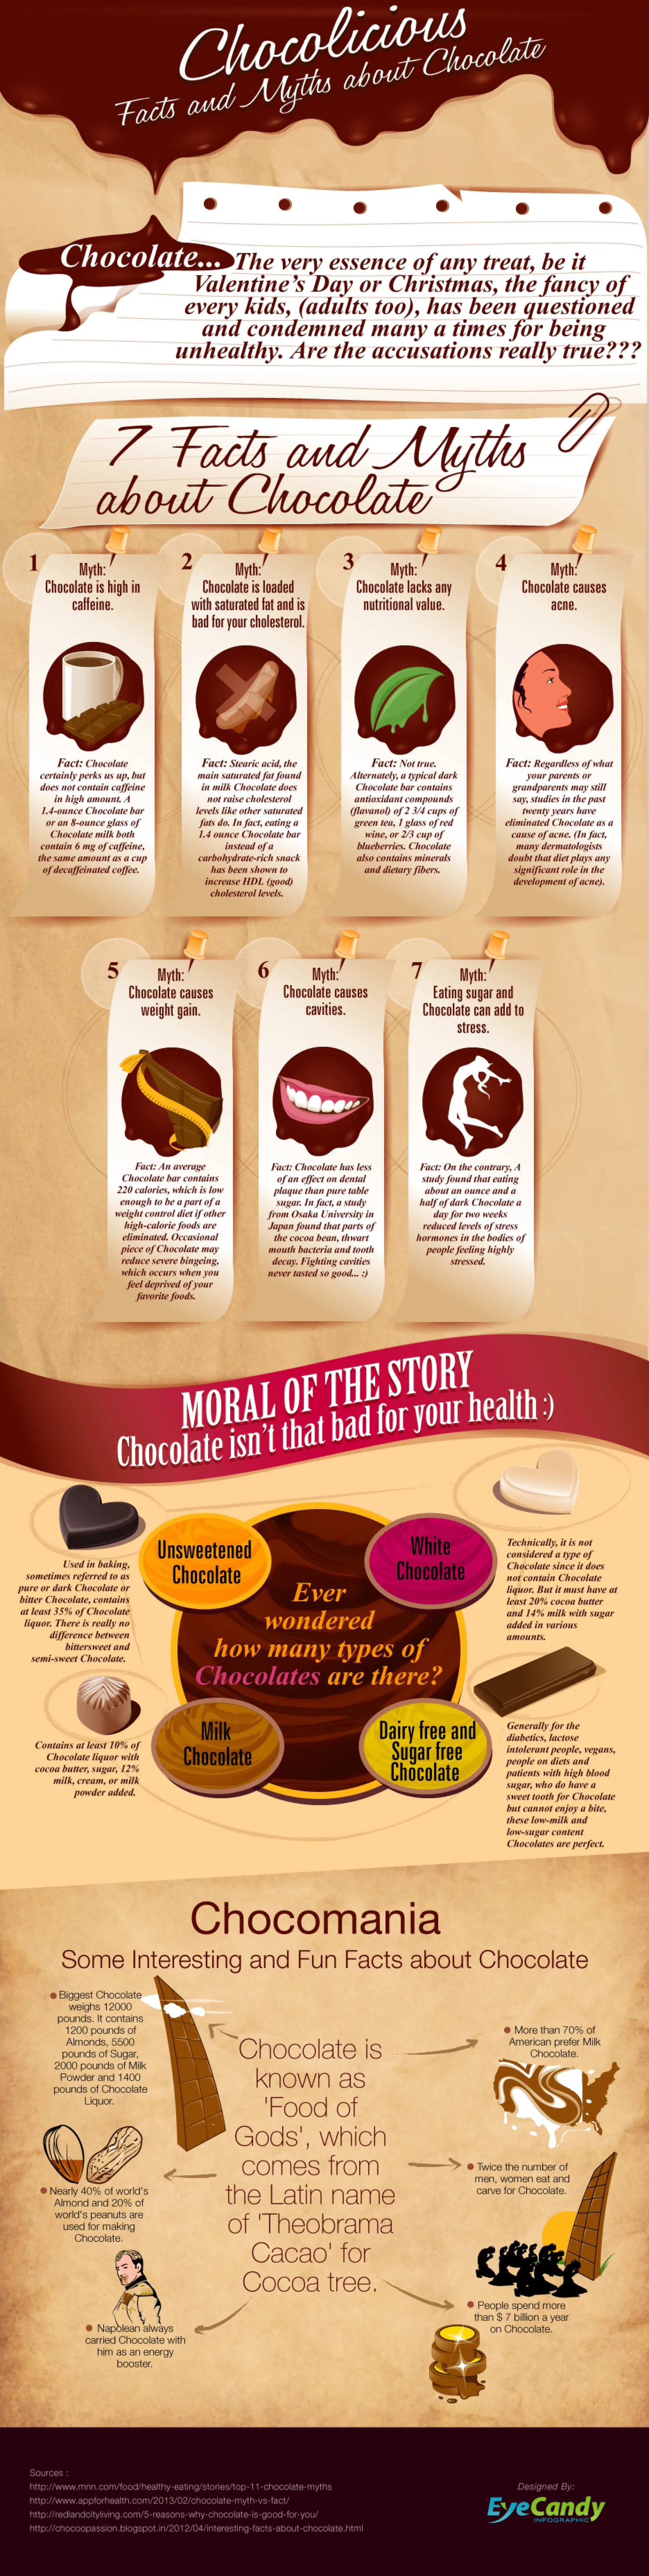 Chocolicious - Facts and Myths about Chocolate